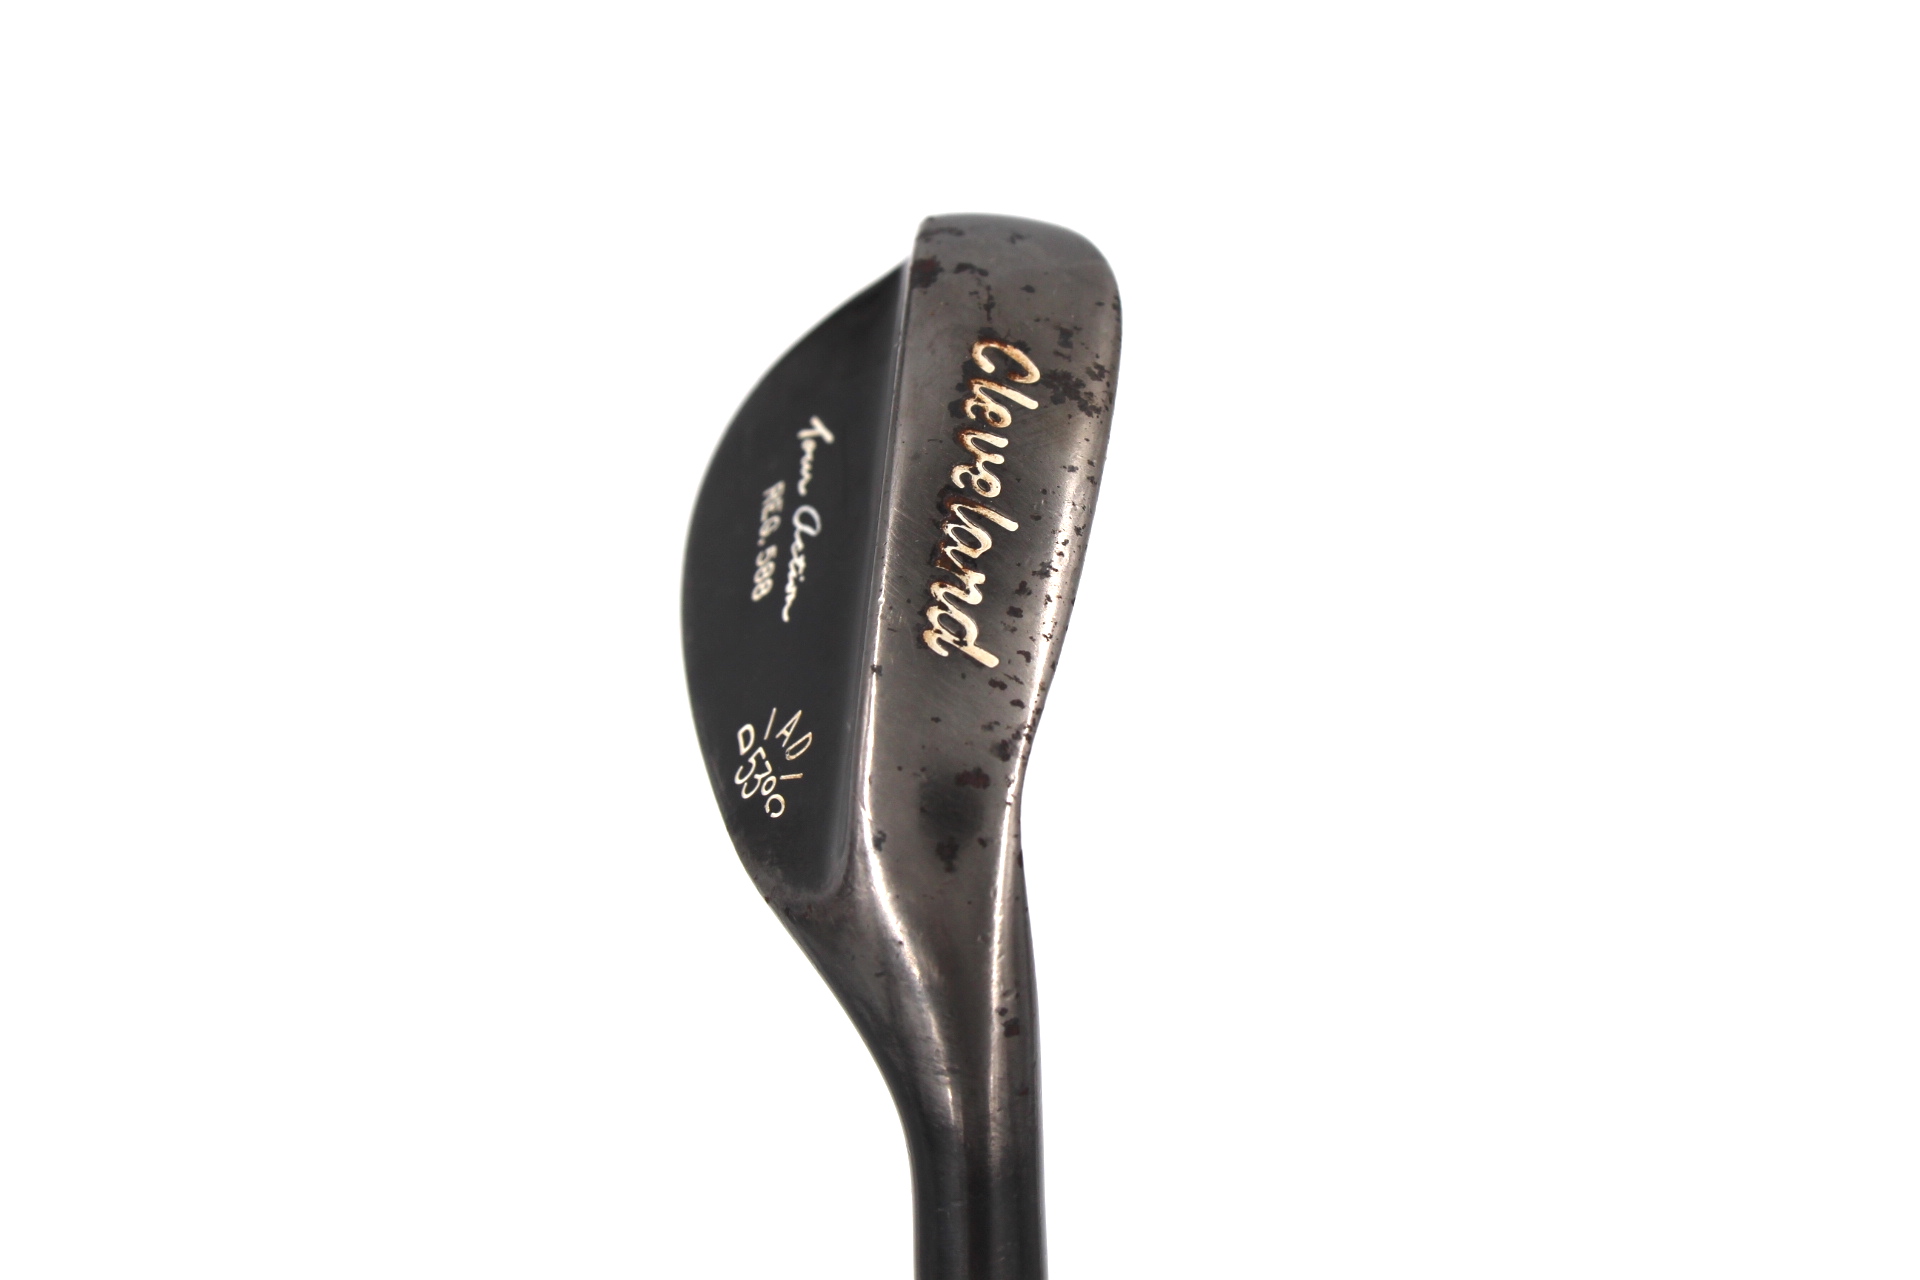 cleveland tour action 588 wedge specifications